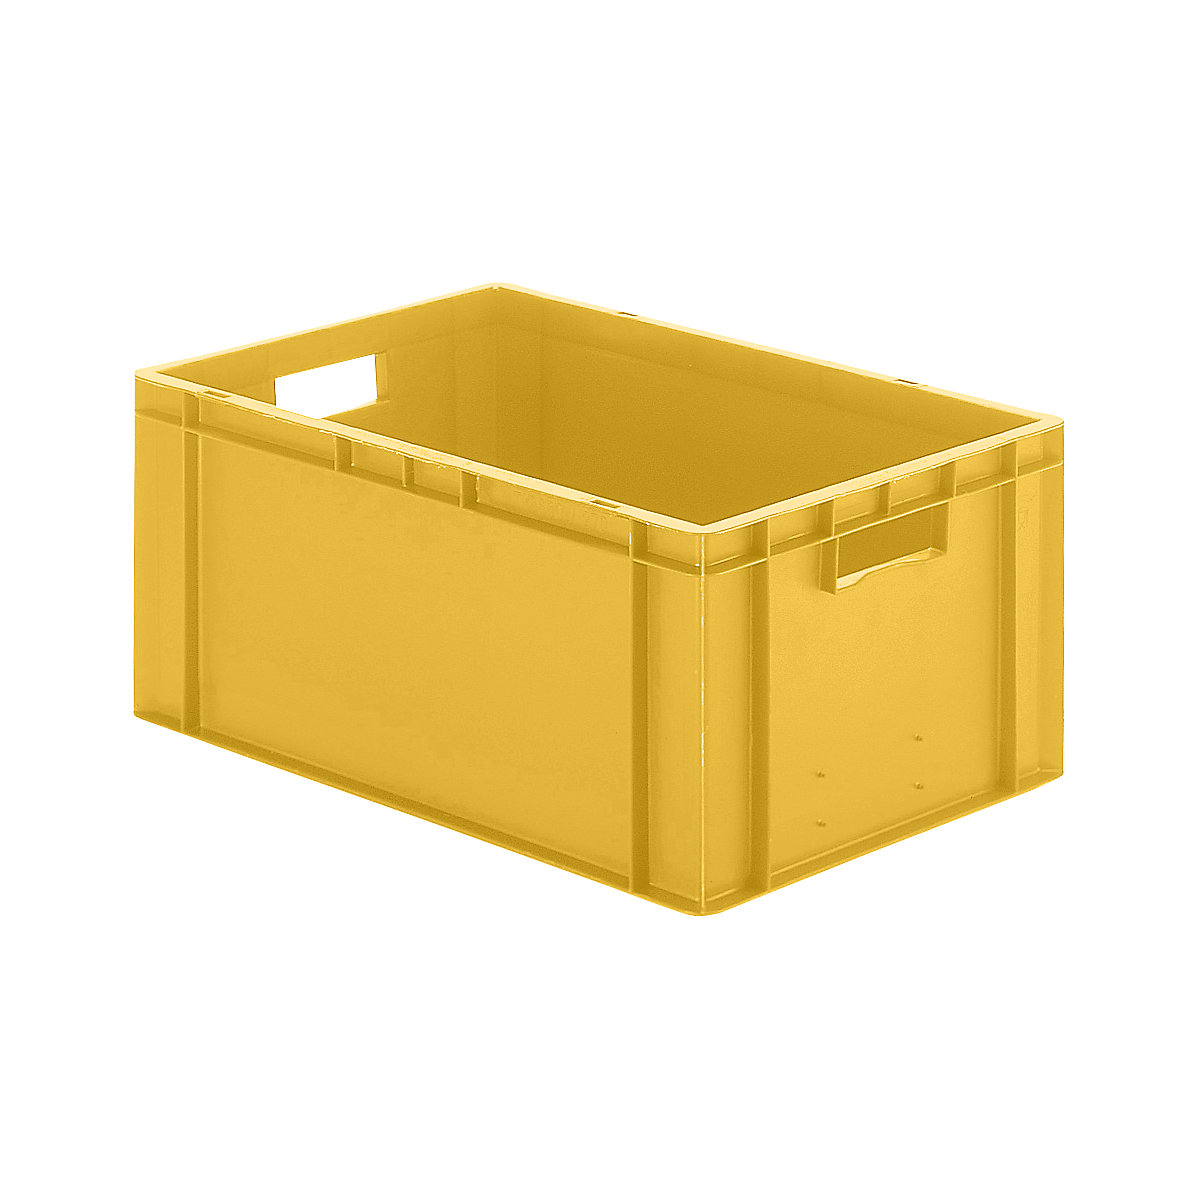 Euro stacking container, closed walls and base, LxWxH 600 x 400 x 270 mm, yellow, pack of 5